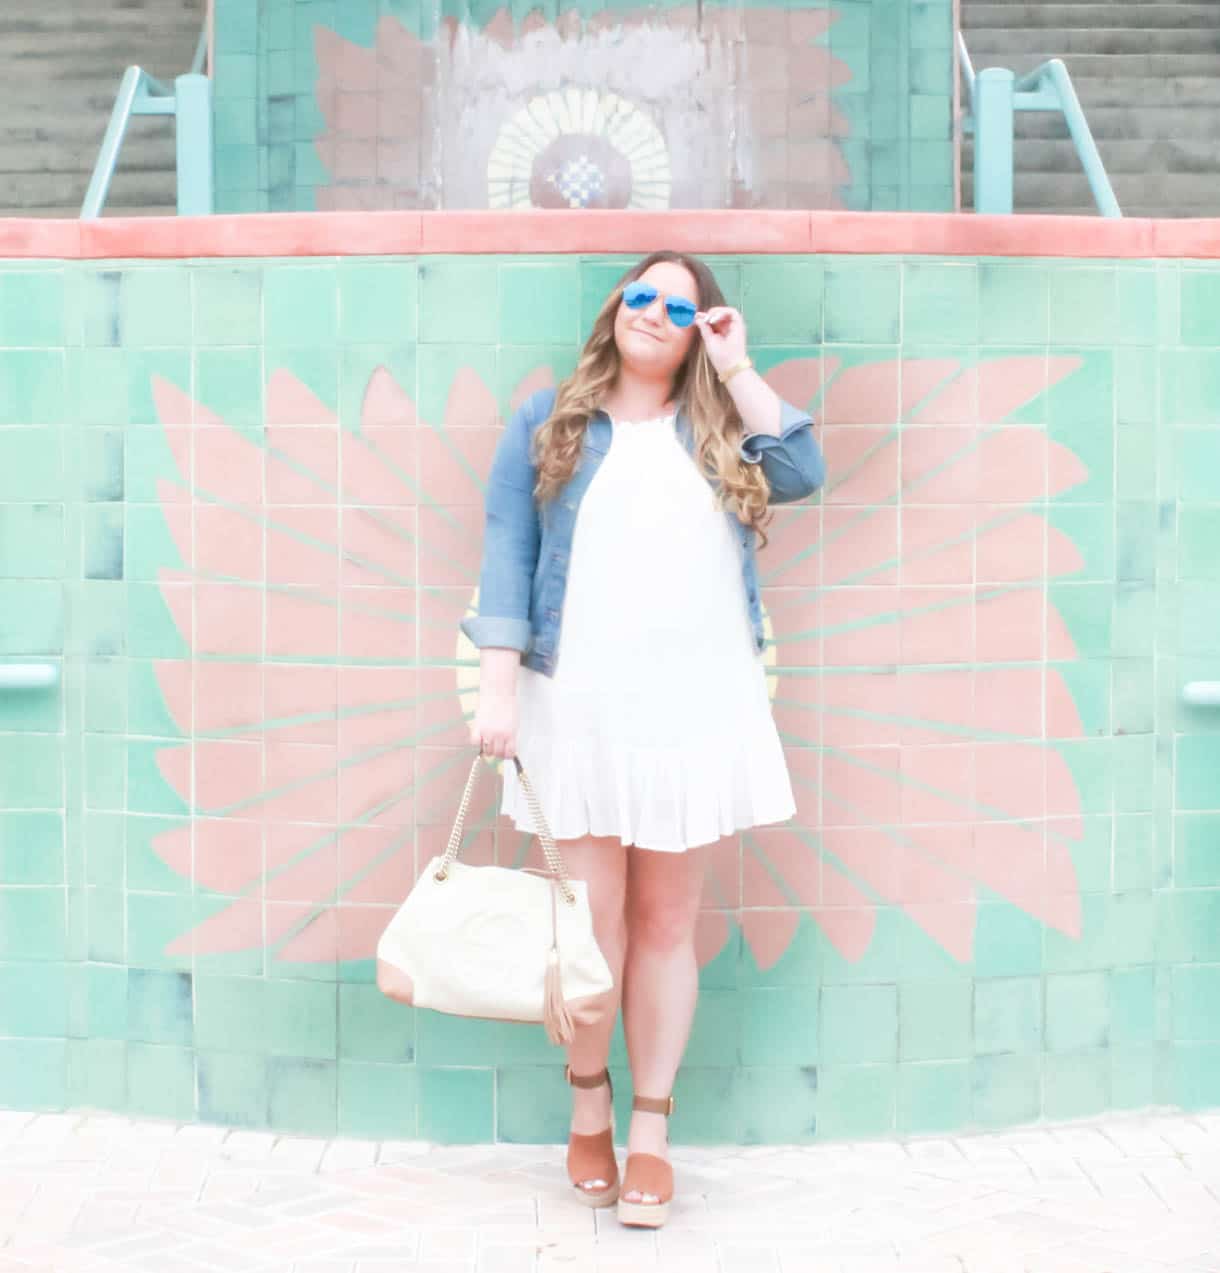 missyonmadison, gucci soho tote, fashion inspo, outfit inspo, missyonmadison blog, missyonmadison instagram, melissa tierney, fashion blog, fashion blogger,style blog, style blogger, gucci, gucci white soho tote, raybans, old navy denim jacket,white tart collections dress, tart collections liz dress, marc fischer shoes, tan platform wedges, summer style, spring style, summer 2018 style, la blogger,